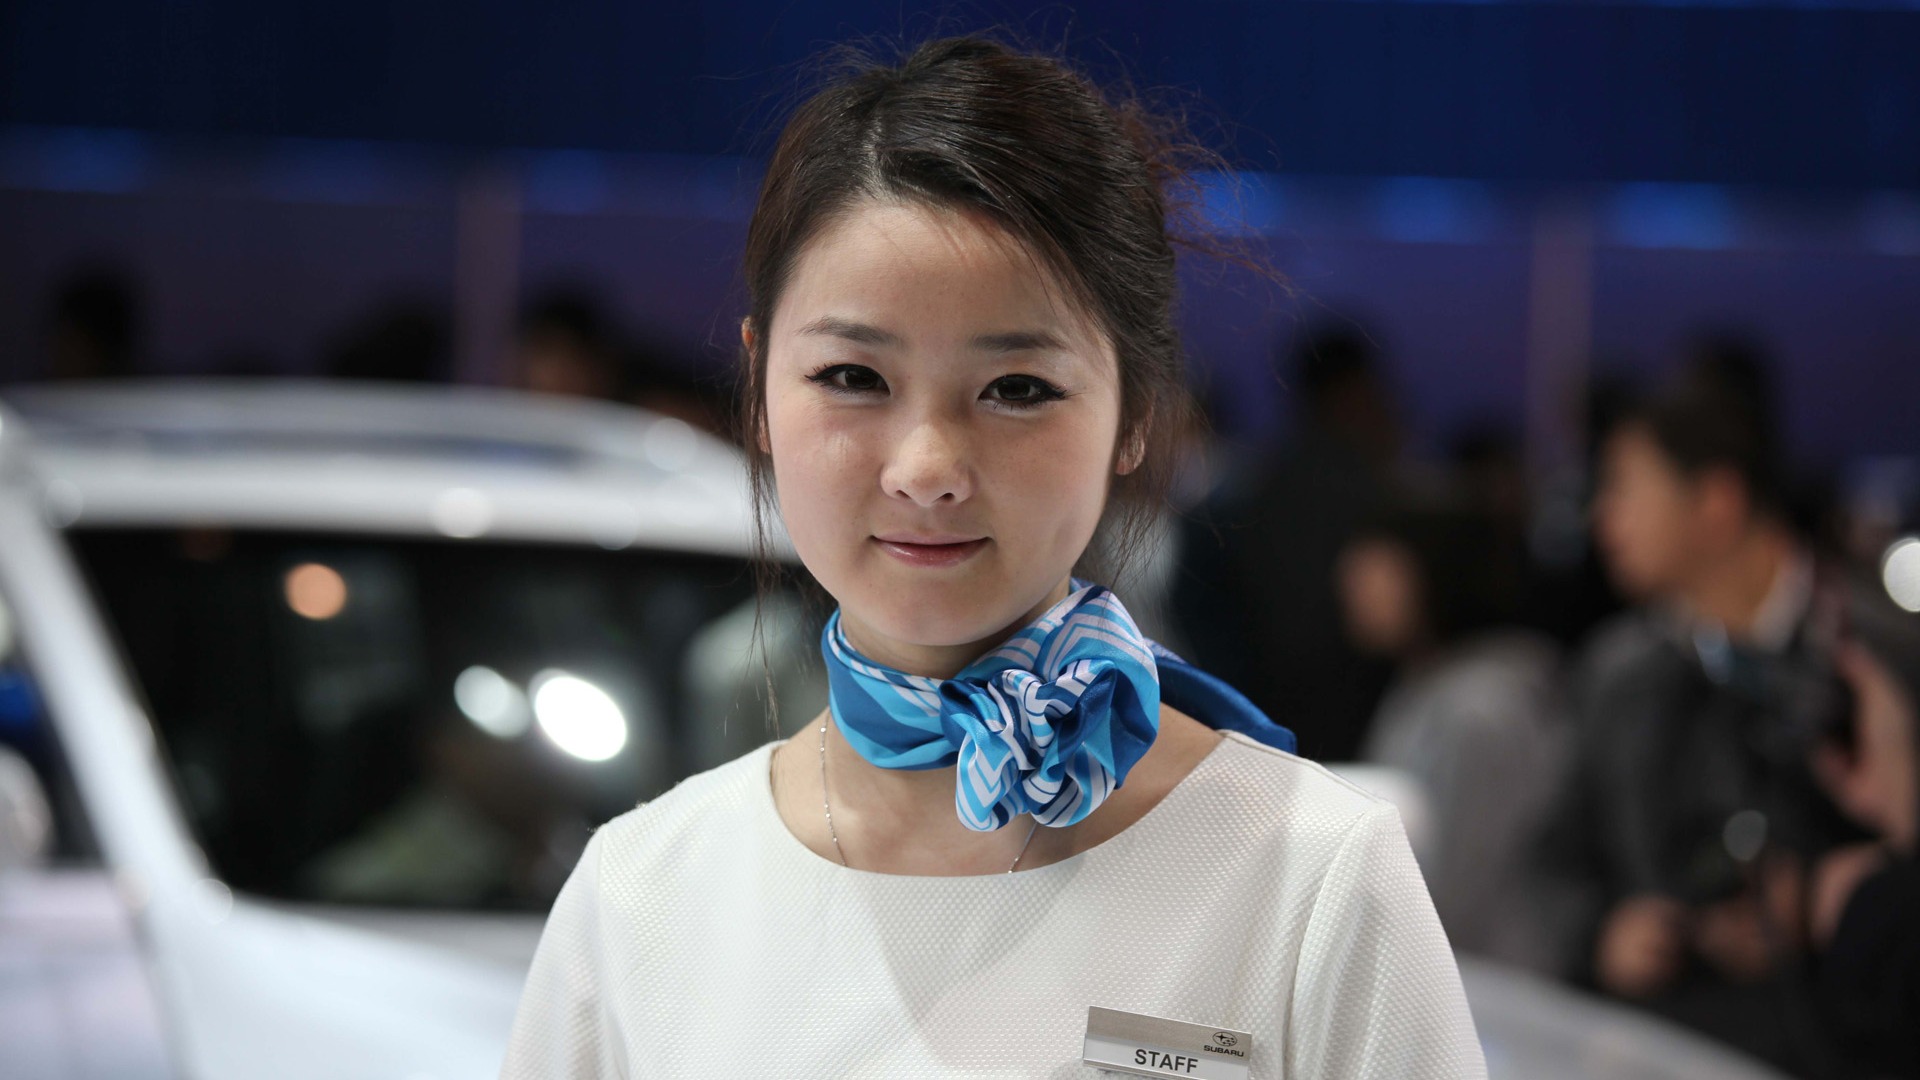 2010 Beijing International Auto Show beauty (1) (the wind chasing the clouds works) #22 - 1920x1080